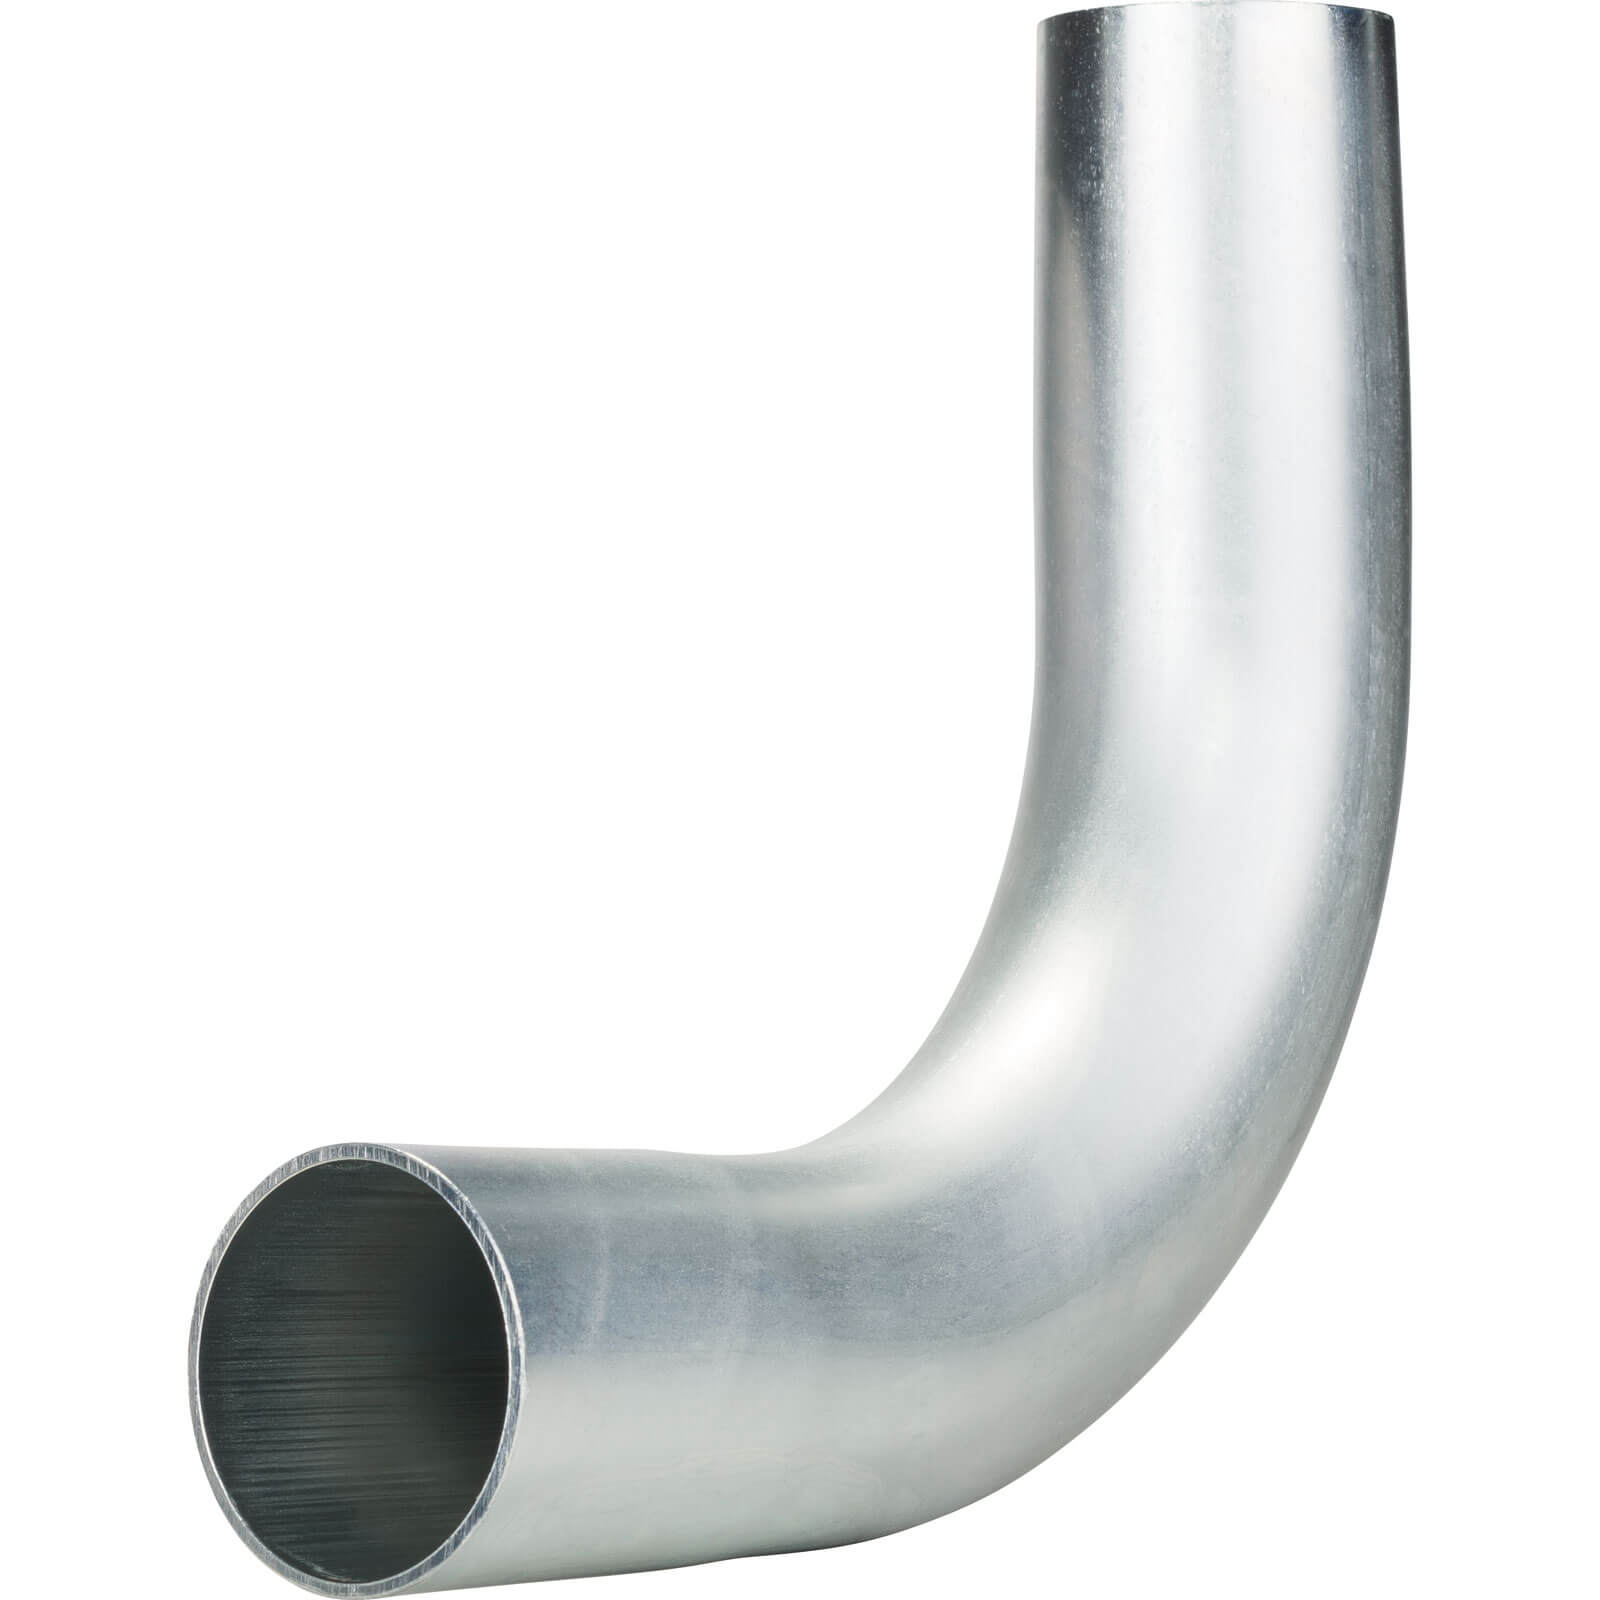 Image of Bosch Dust Extractor Elbow Pipe for 35mm Hoses